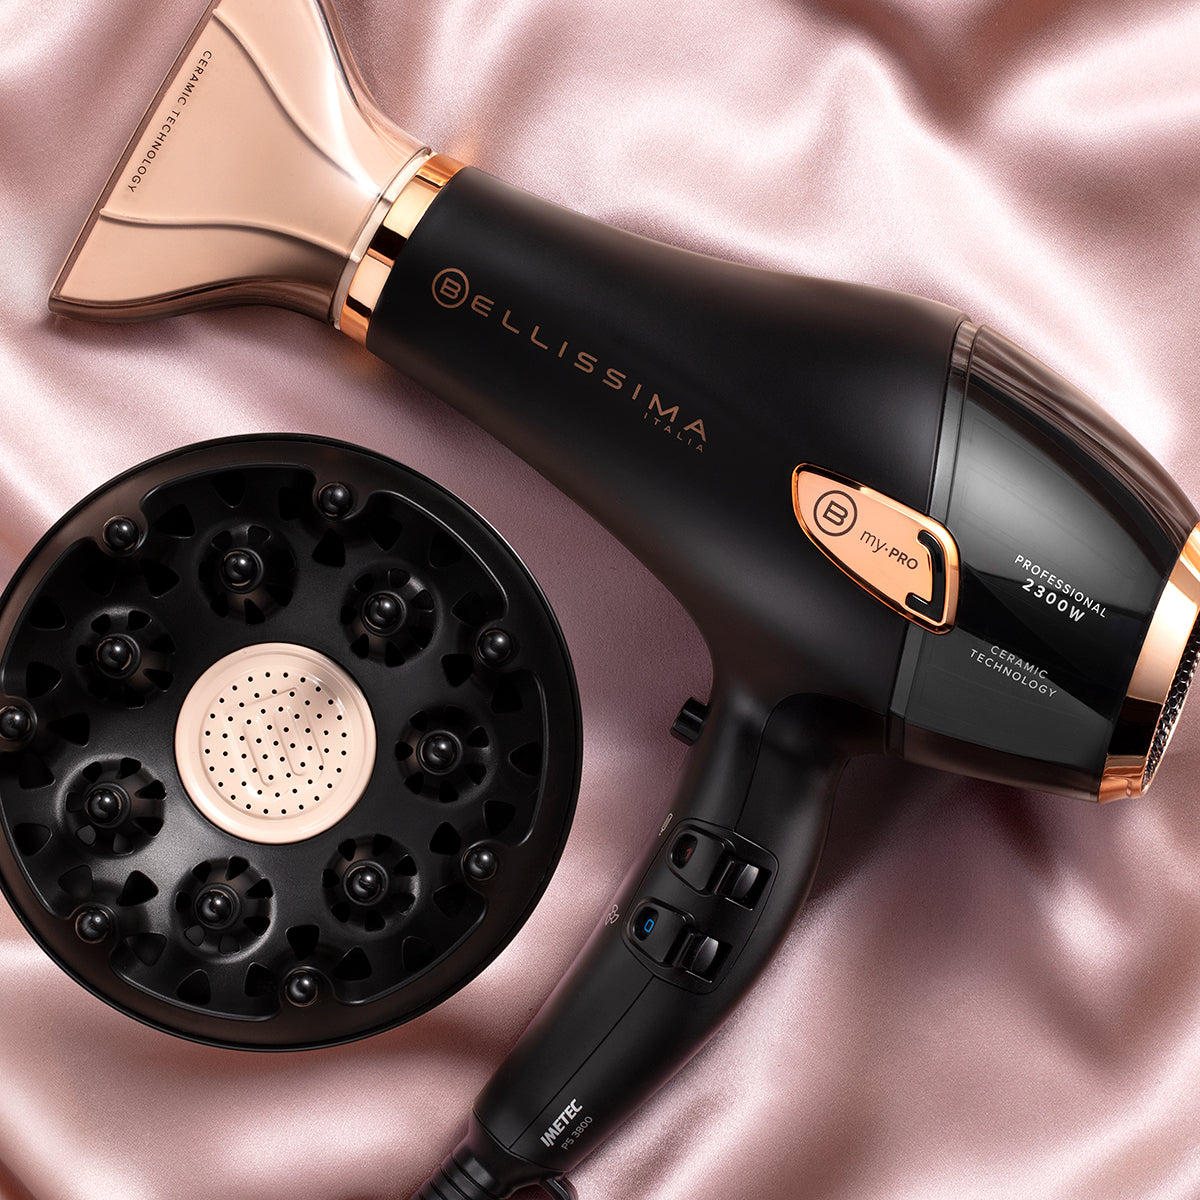 How to Clean a Hair Dryer - Step-by-Step Guide